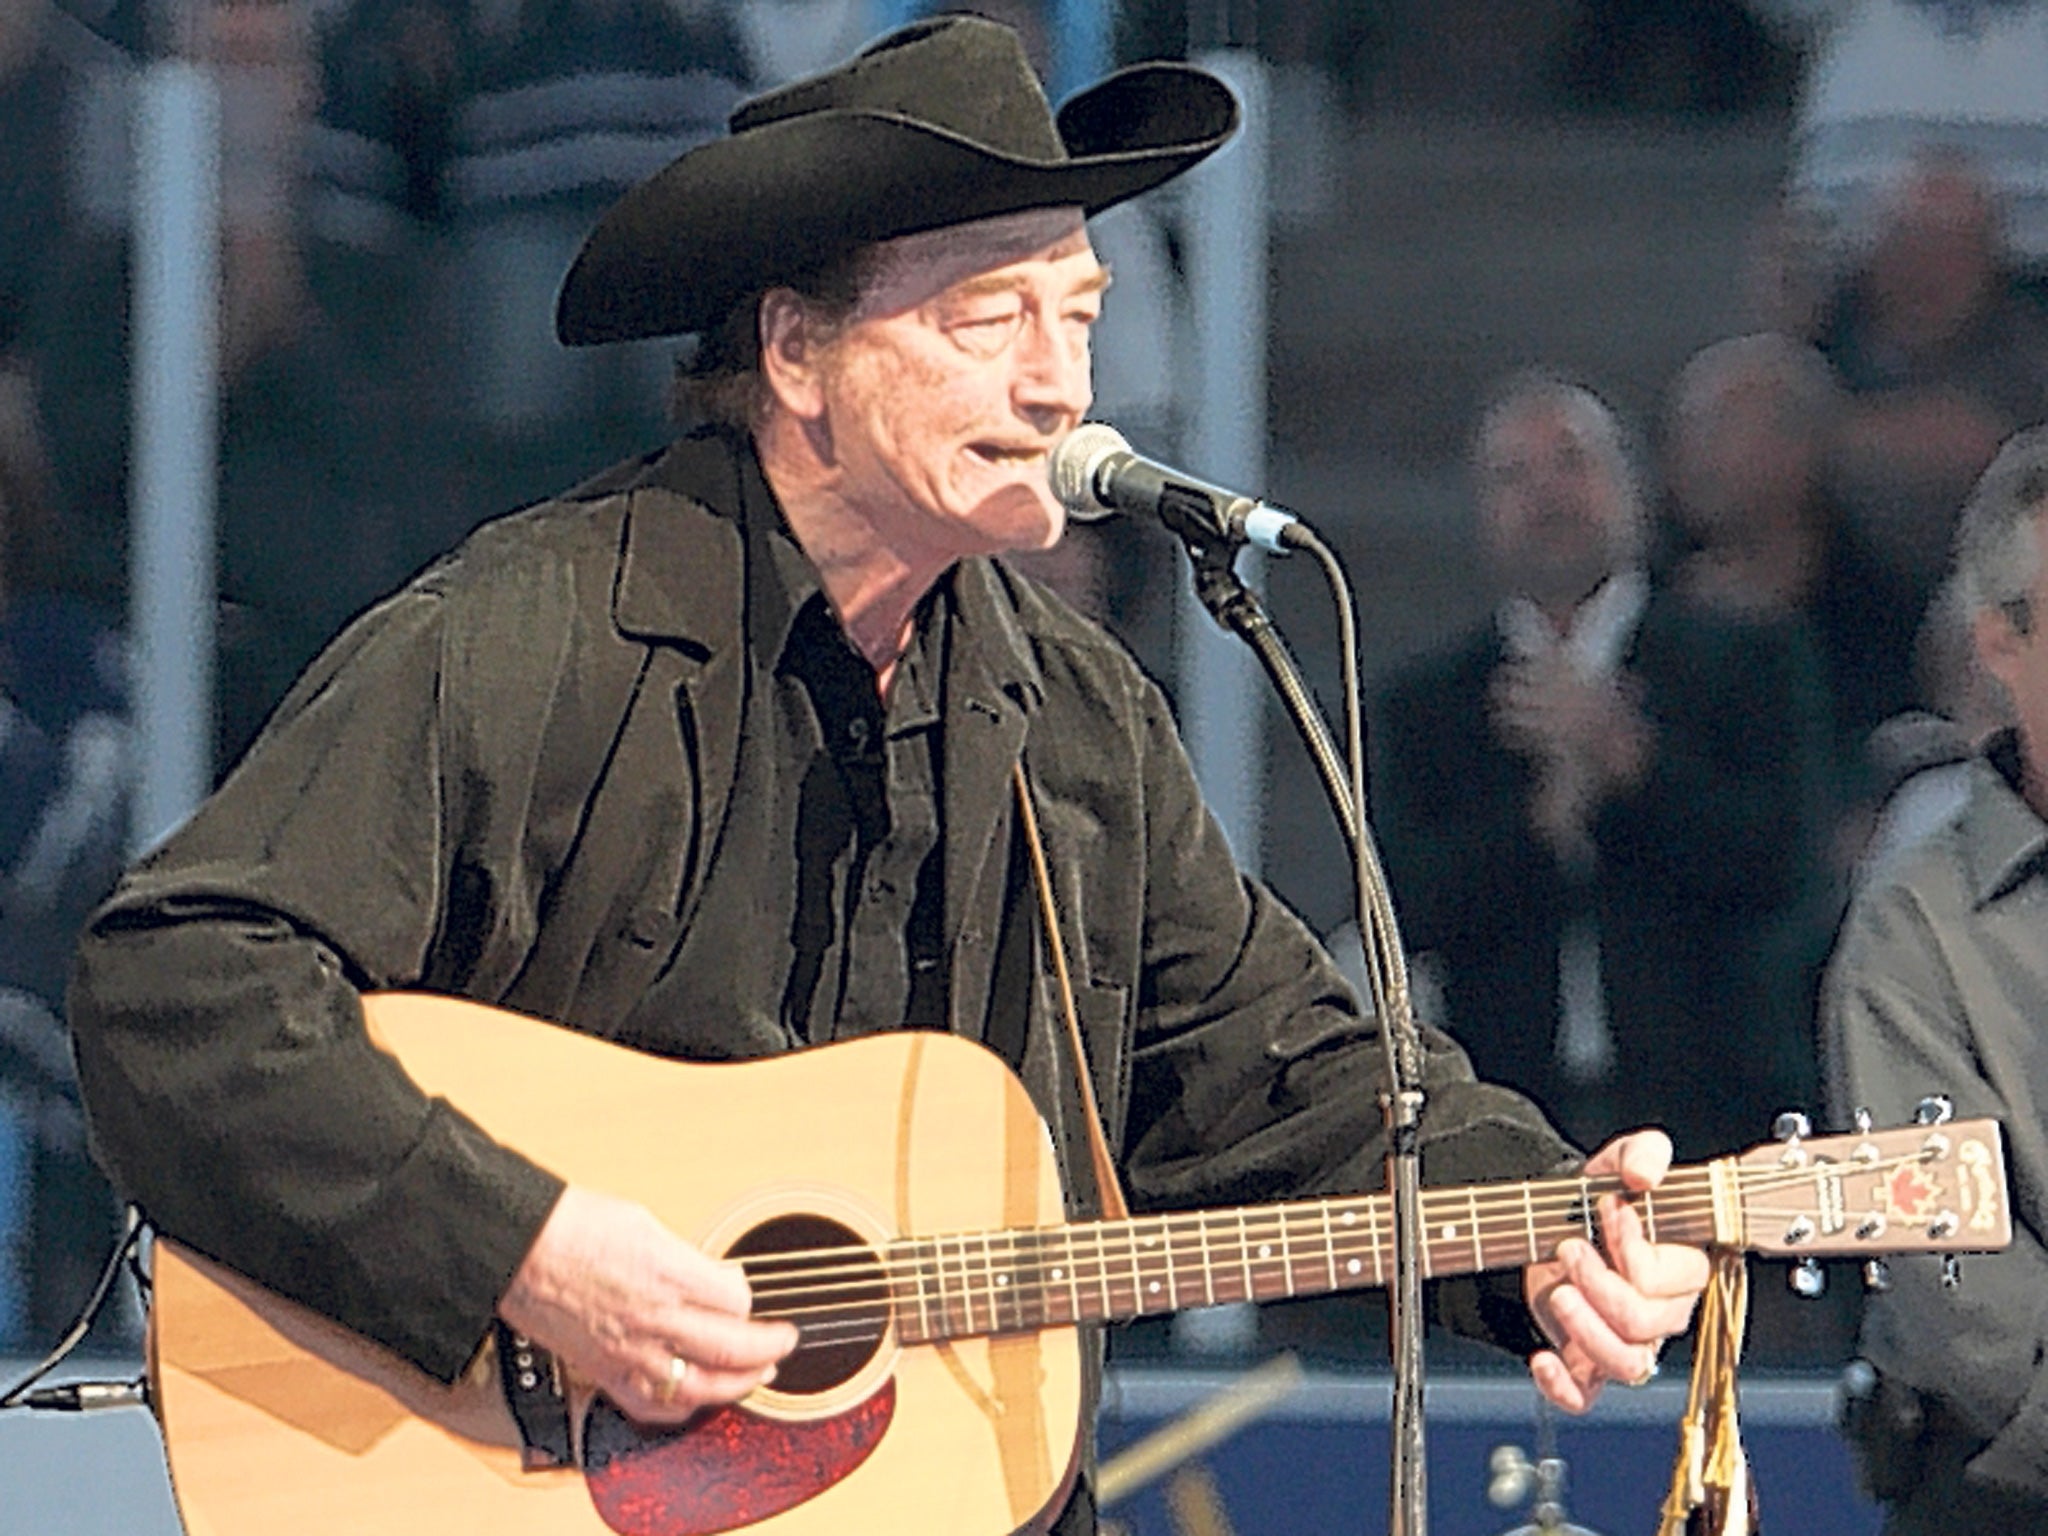 Stompin' Tom Connors: Singer who celebrated his native Canada in his